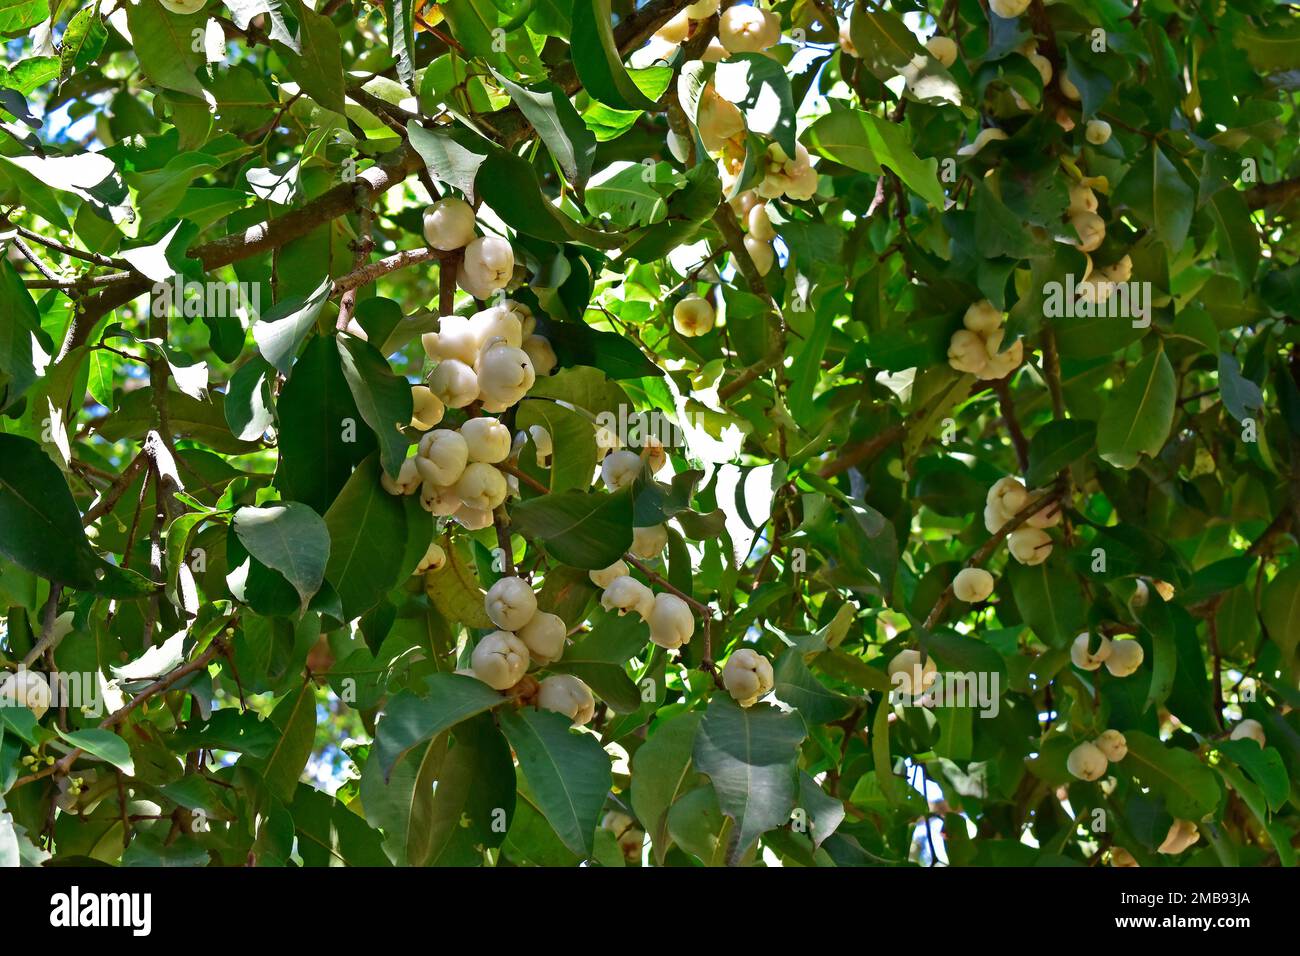 Watery rose apple, water apple or bell fruits (Syzygium aqueum) on tree in Rio de Janeiro Stock Photo